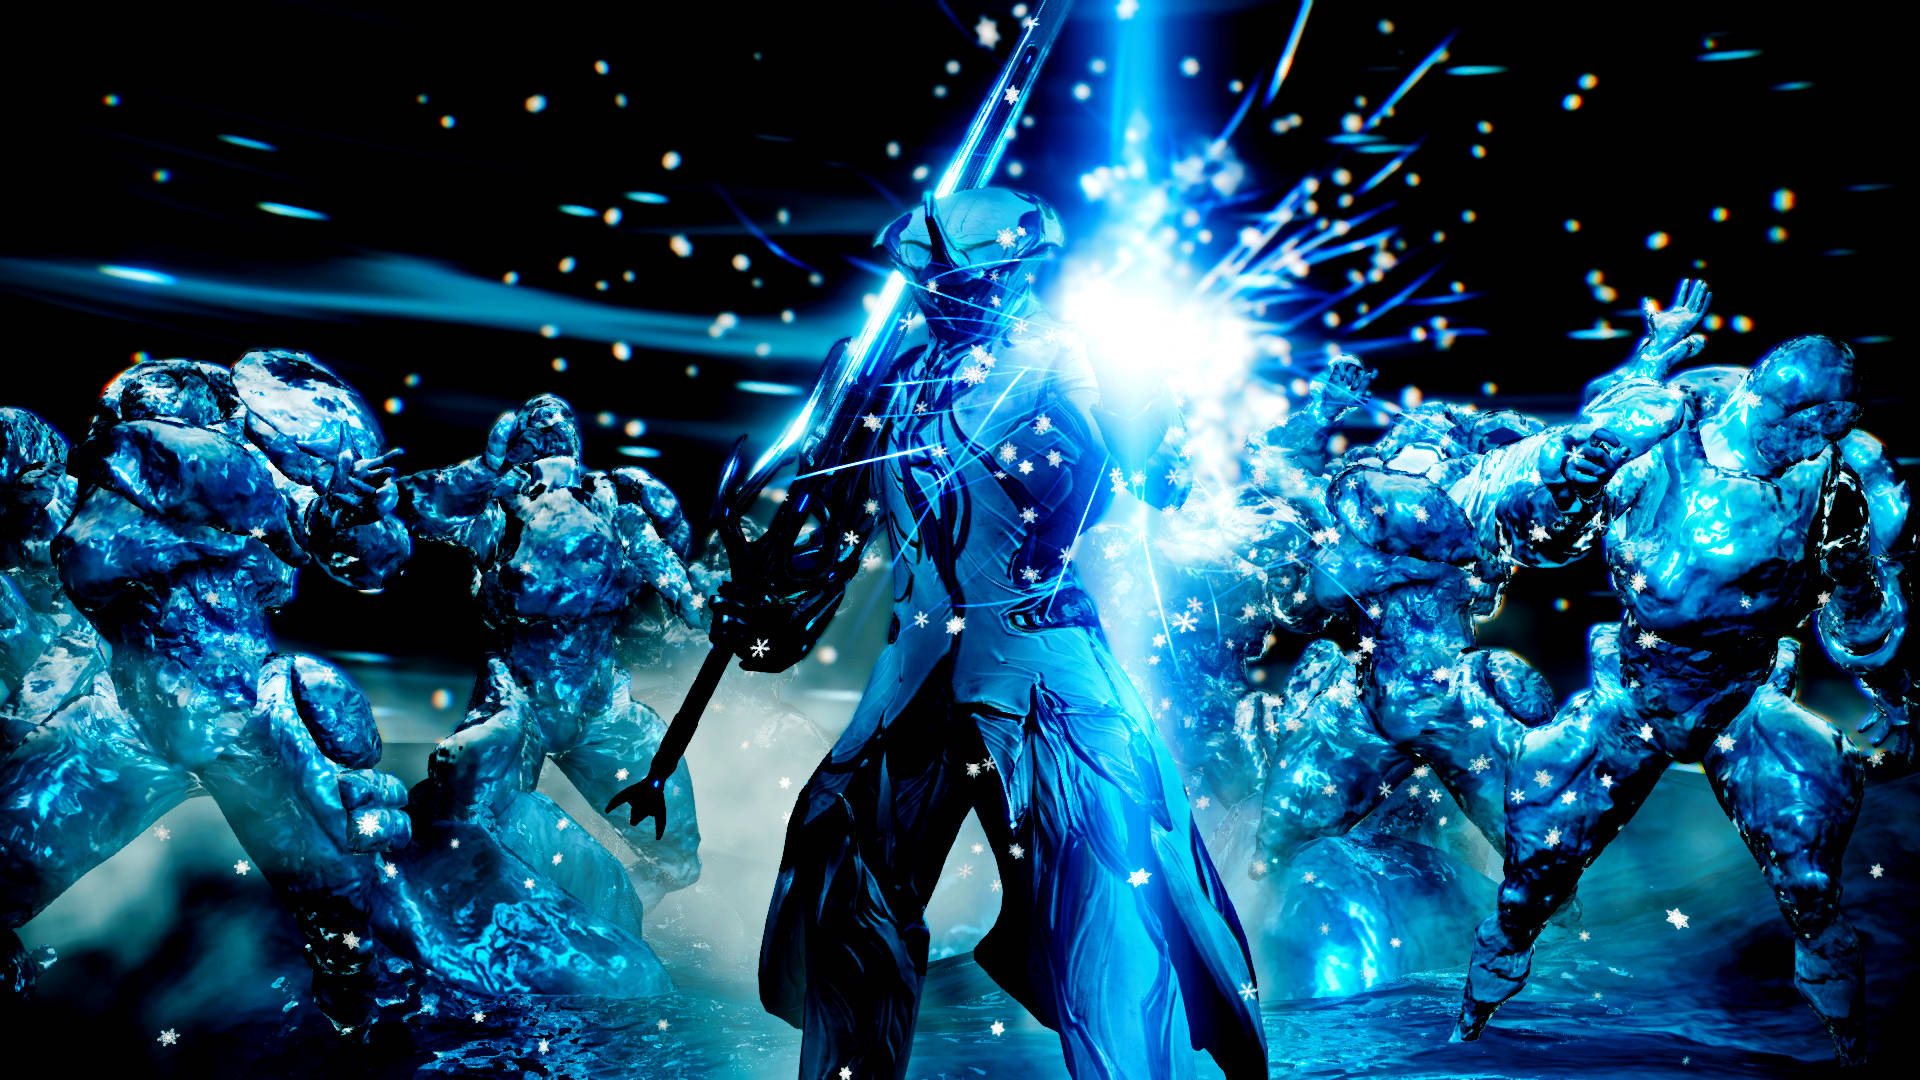 Warframe Tenno ancient soldier with huge sword and blue powers wallpaper.